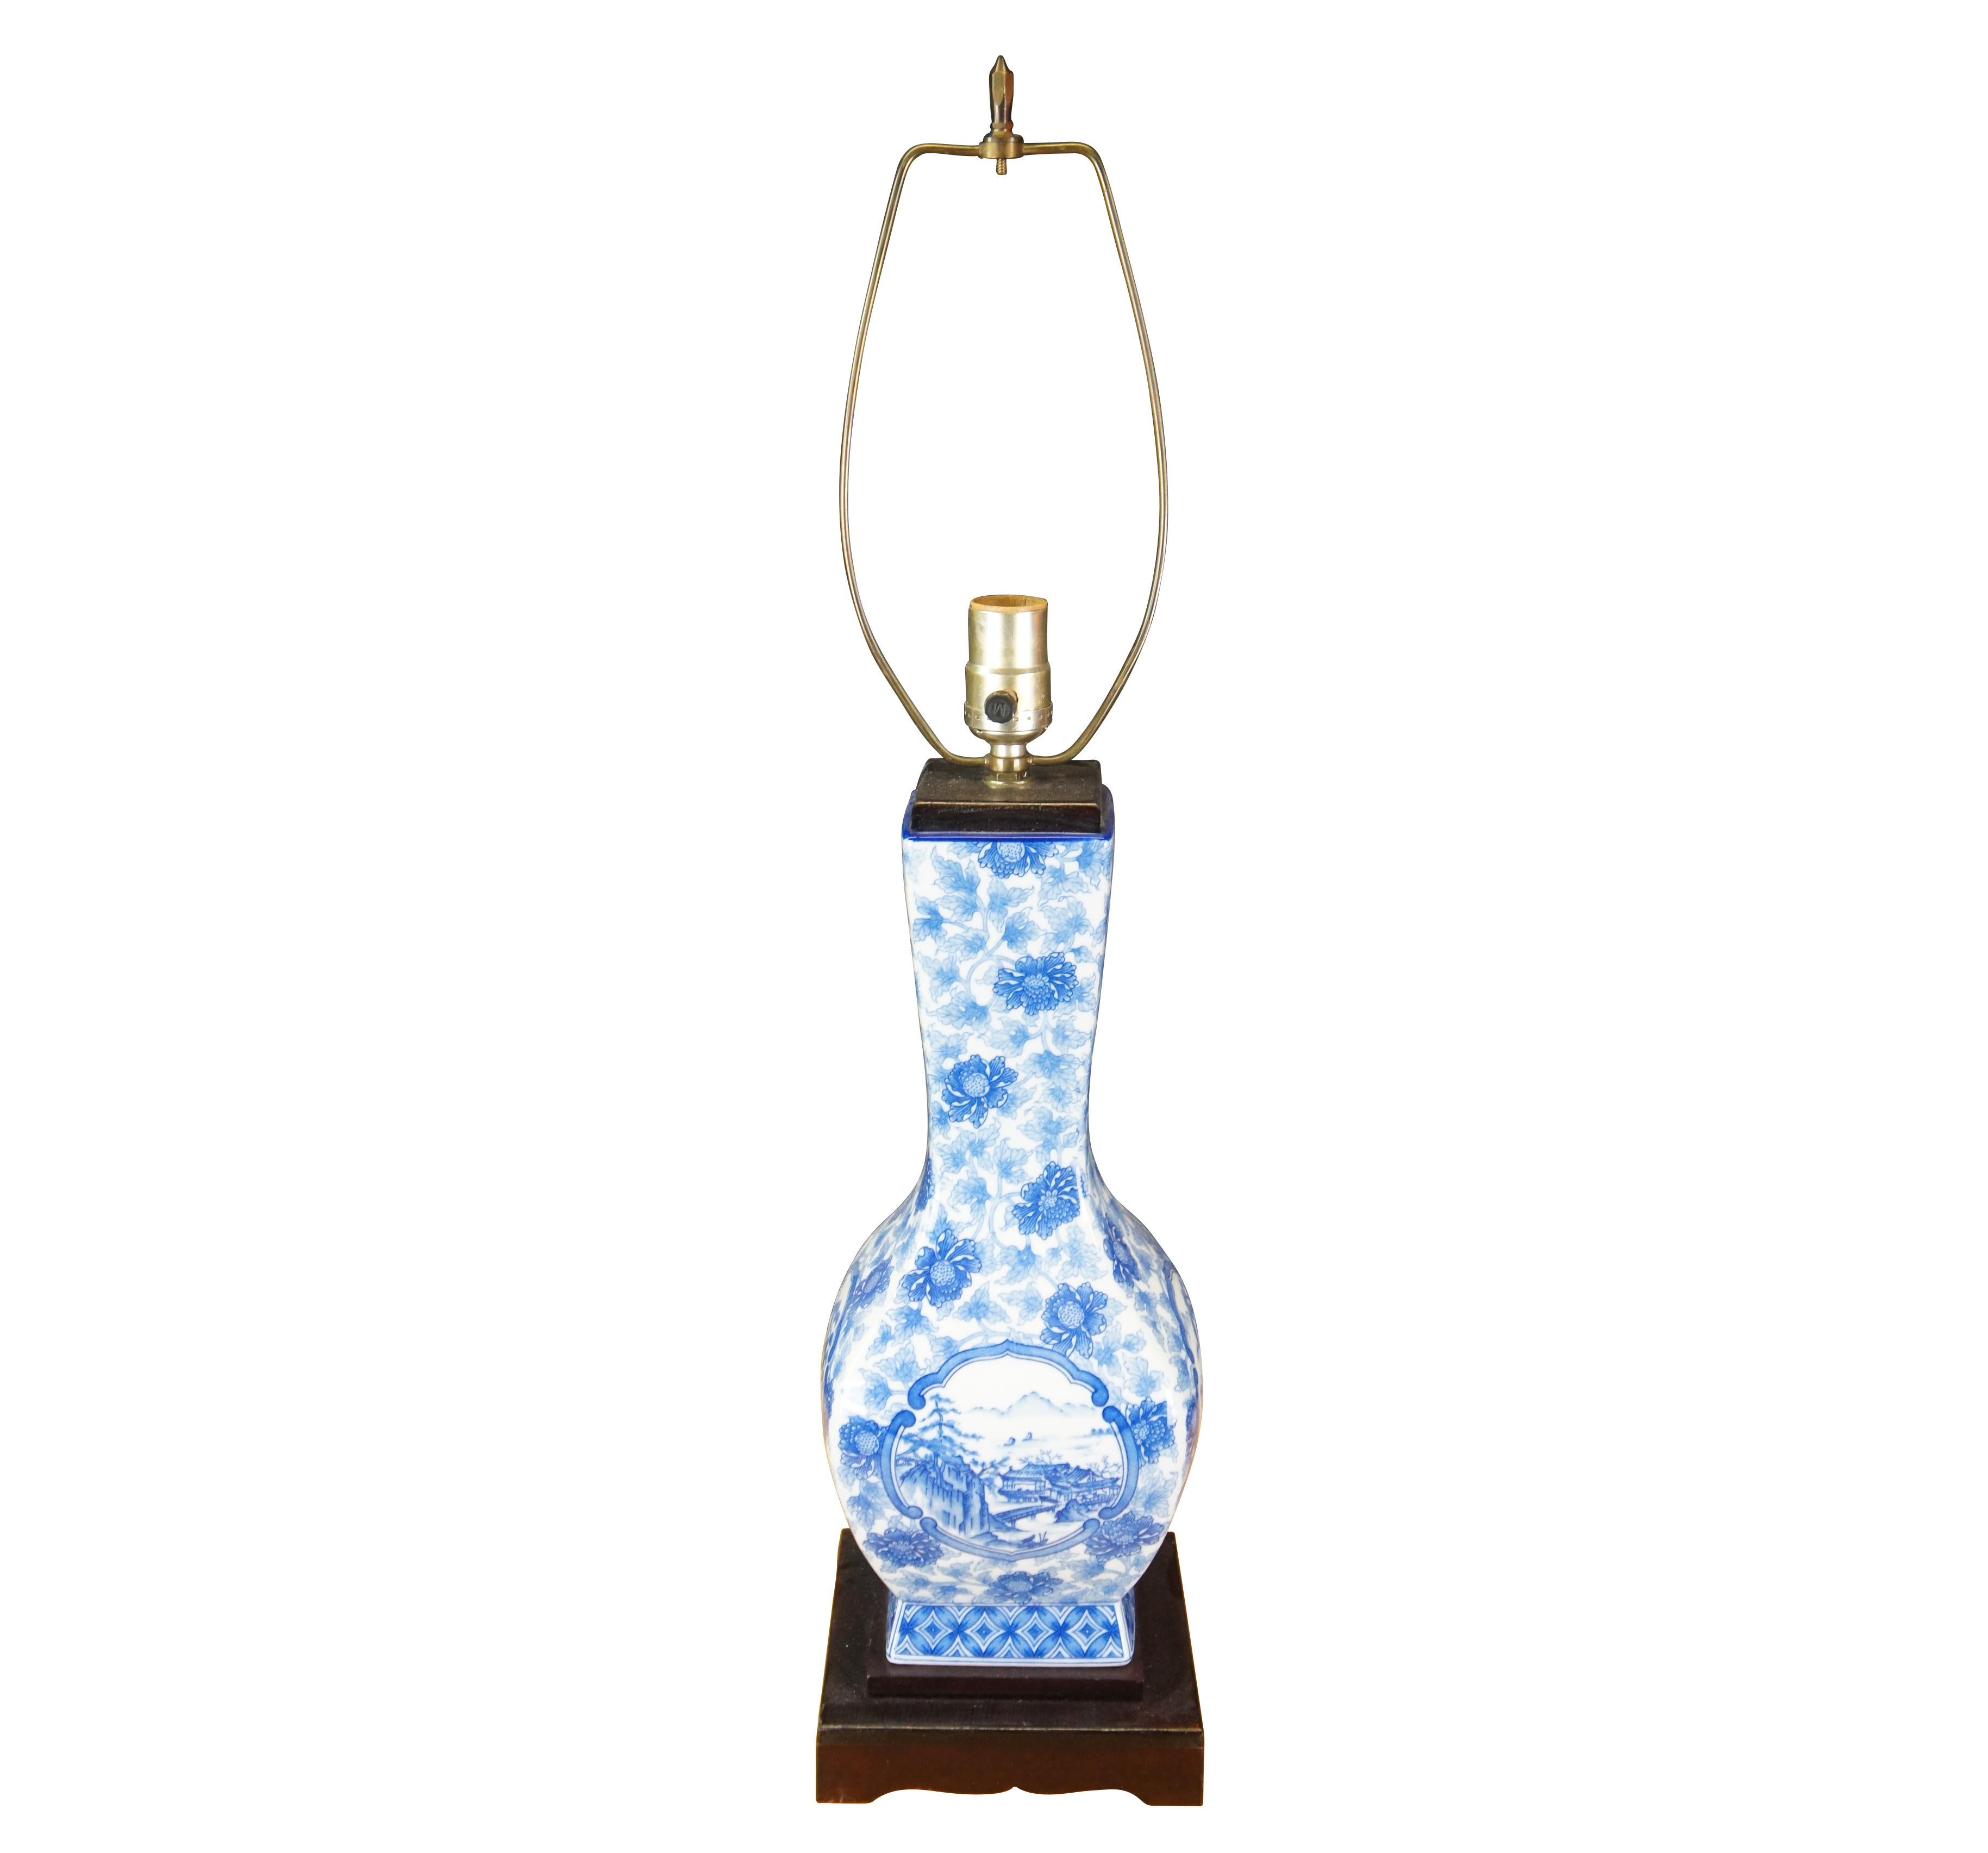 Chinoiserie Chinese Blue & White Porcelain Urn Chrysanthemums Pagoda Landscape Table Lamps For Sale